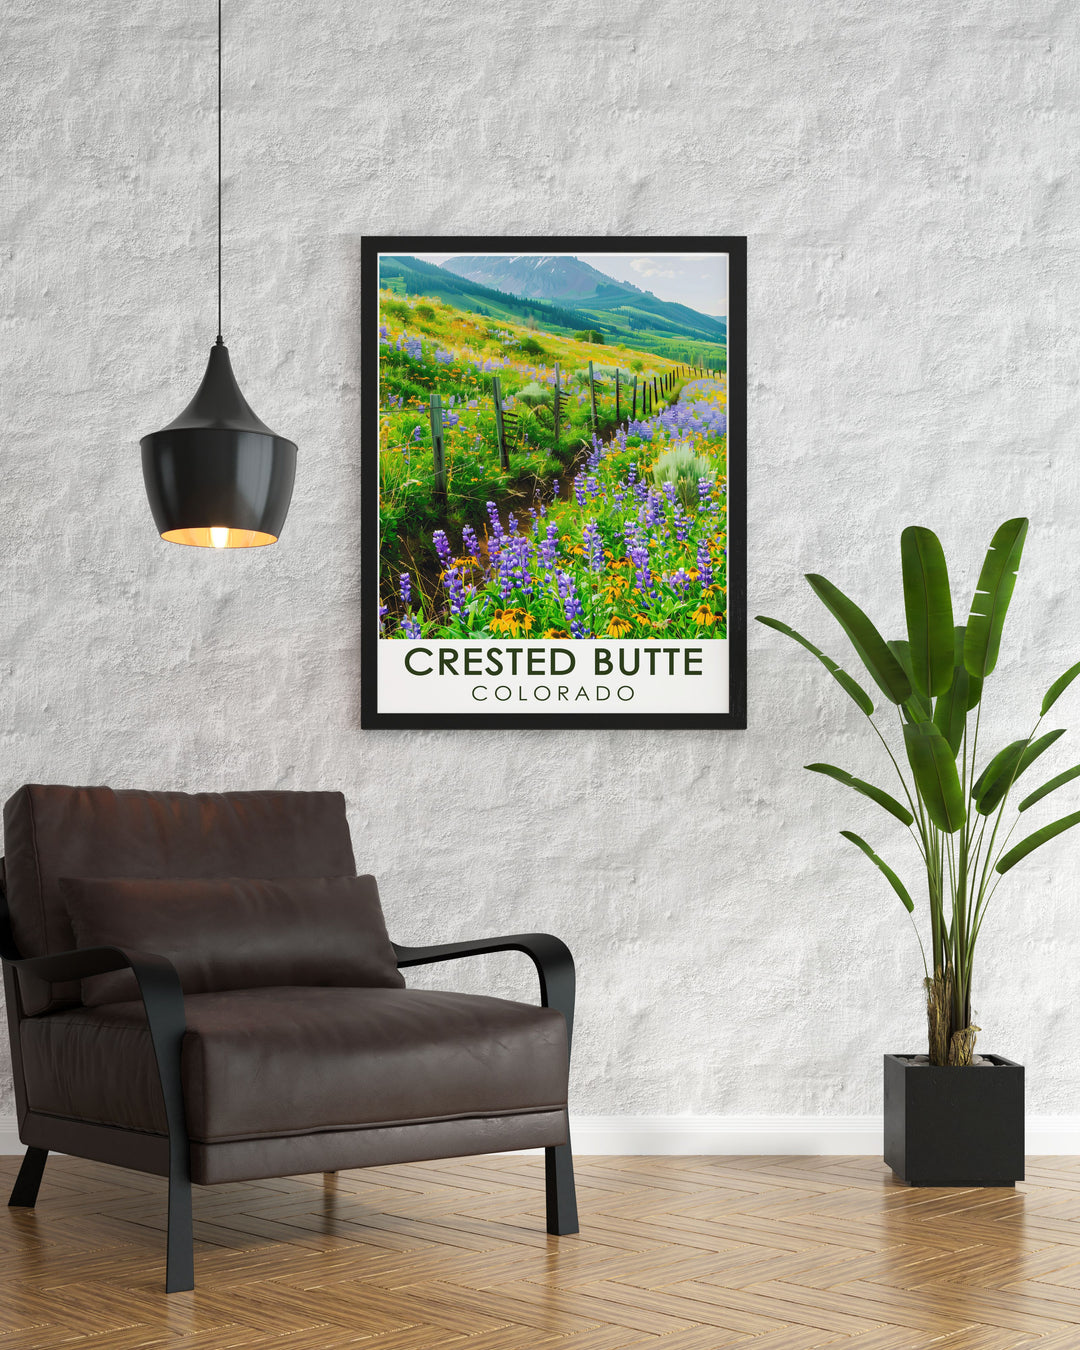 Beautiful Historic Downtown artwork from Crested Butte featuring detailed illustrations of the towns unique charm and character against the backdrop of the Rocky Mountains a perfect gift for Colorado lovers and art enthusiasts.